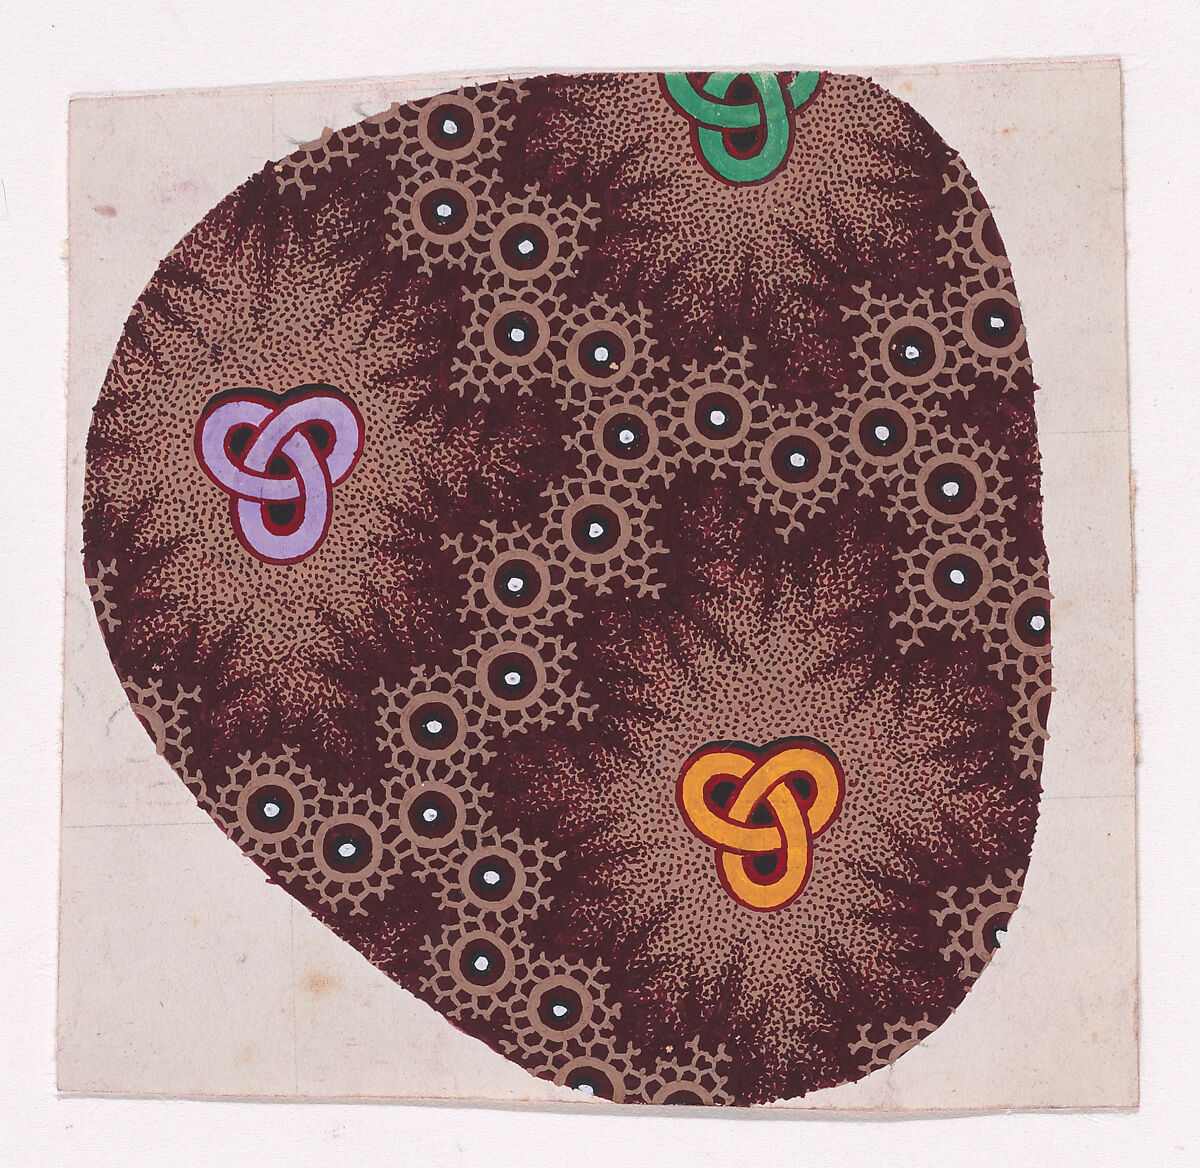 Textile Design with Trefoil Knots Framed by an Interlacing Honeycomb Pattern with Pearls, Anonymous, Alsatian, 19th century, Gouache 